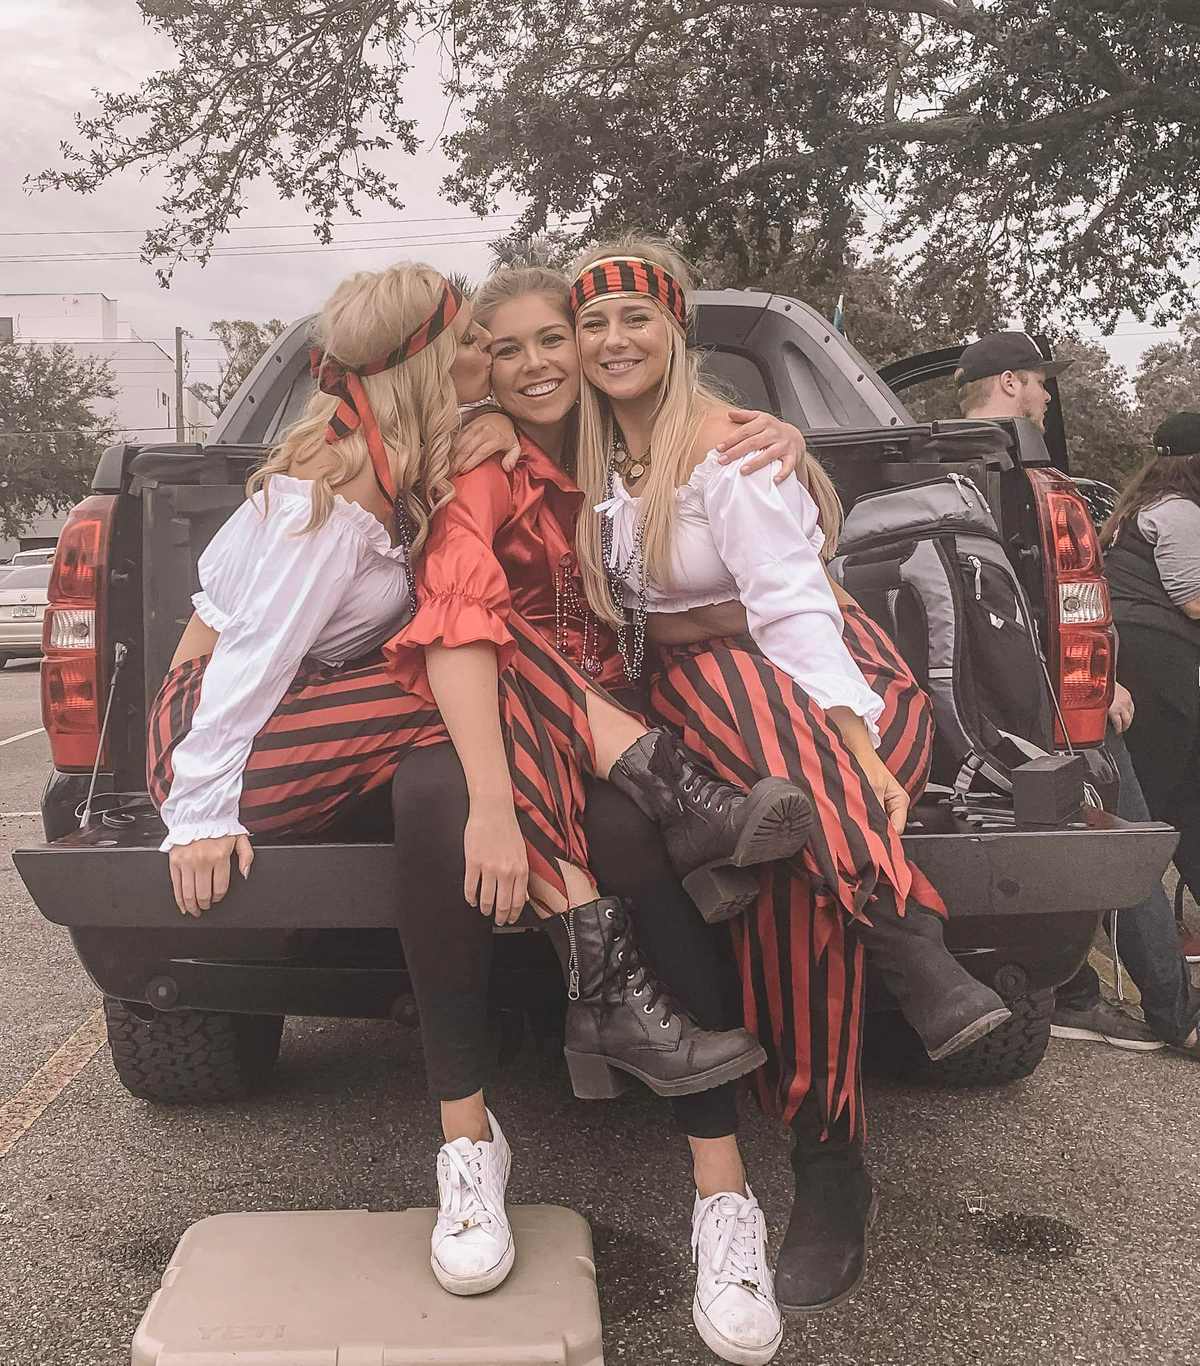 3 girls on a truck bed in pirate outfits celebrating Tampa's annual Gasparilla Festival